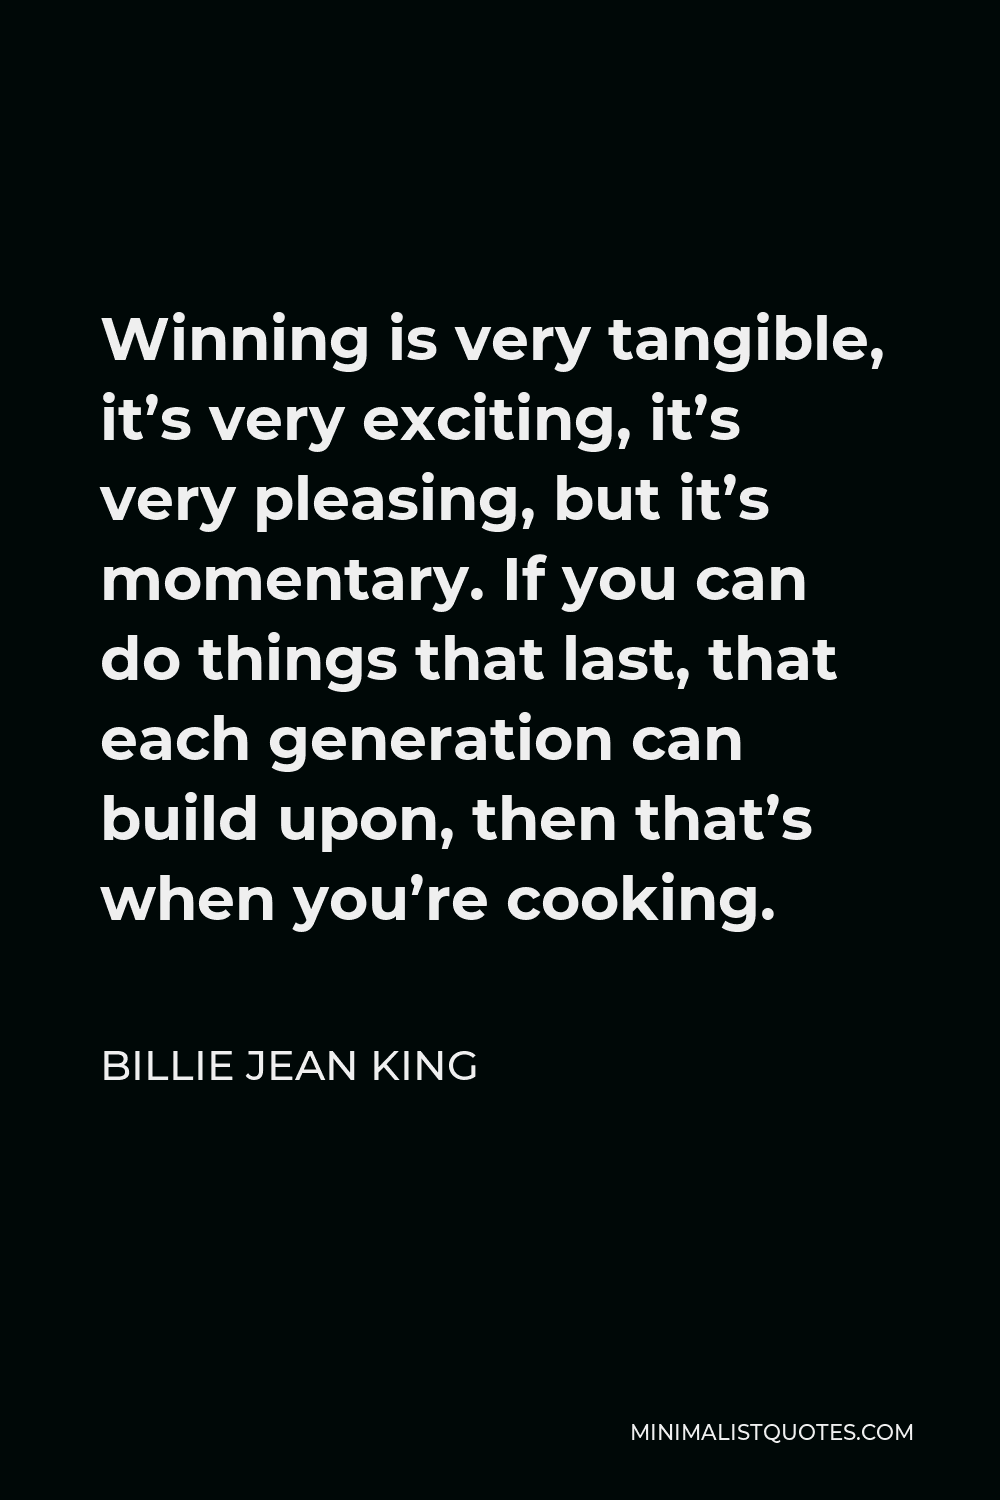 Billie Jean King Quote - Winning is very tangible, it’s very exciting, it’s very pleasing, but it’s momentary. If you can do things that last, that each generation can build upon, then that’s when you’re cooking.